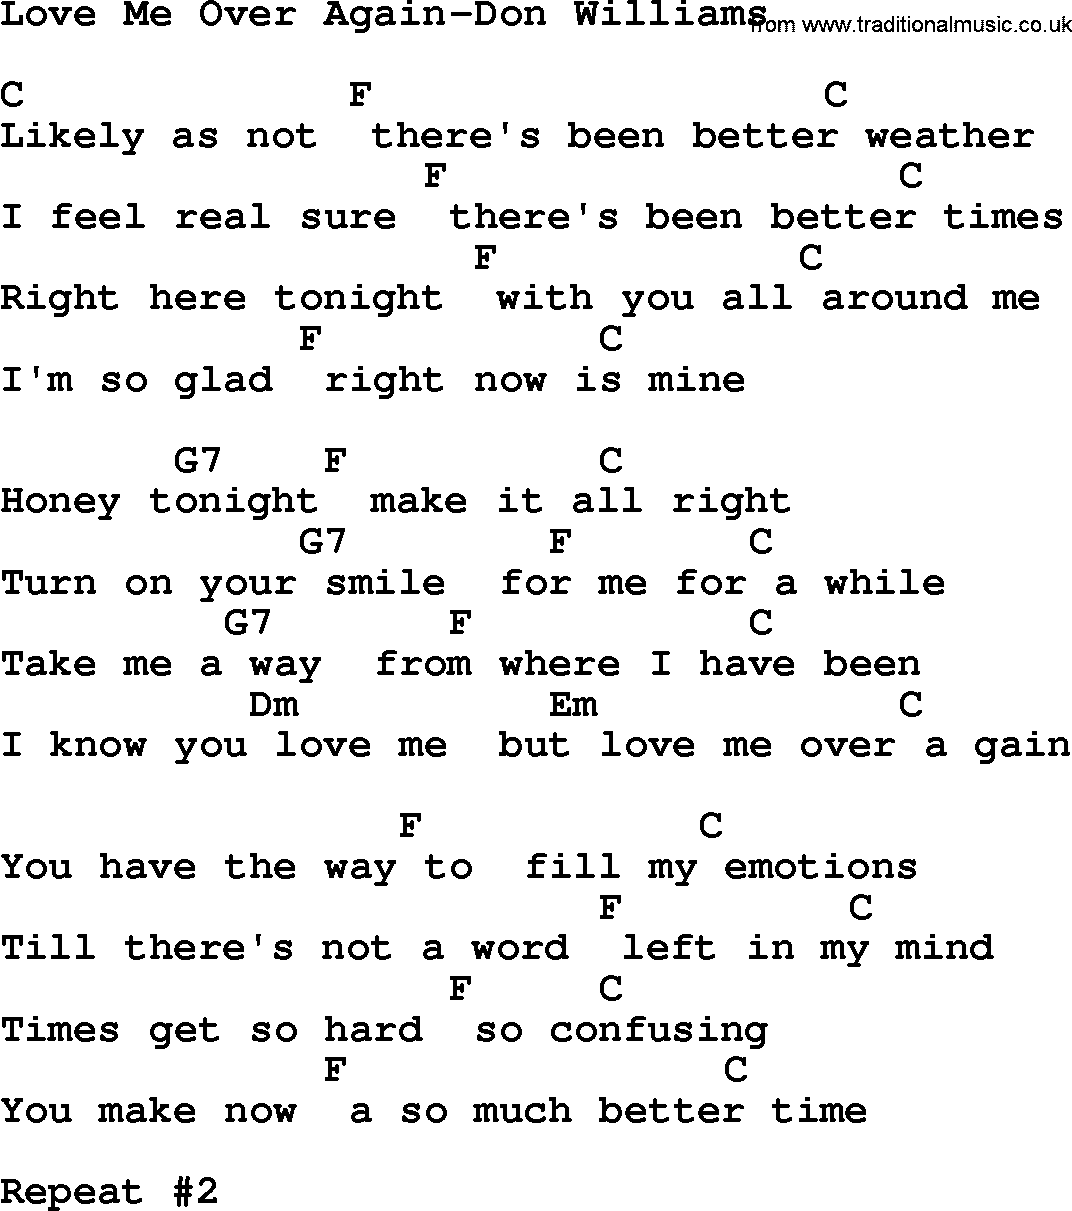 Country music song: Love Me Over Again-Don Williams lyrics and chords